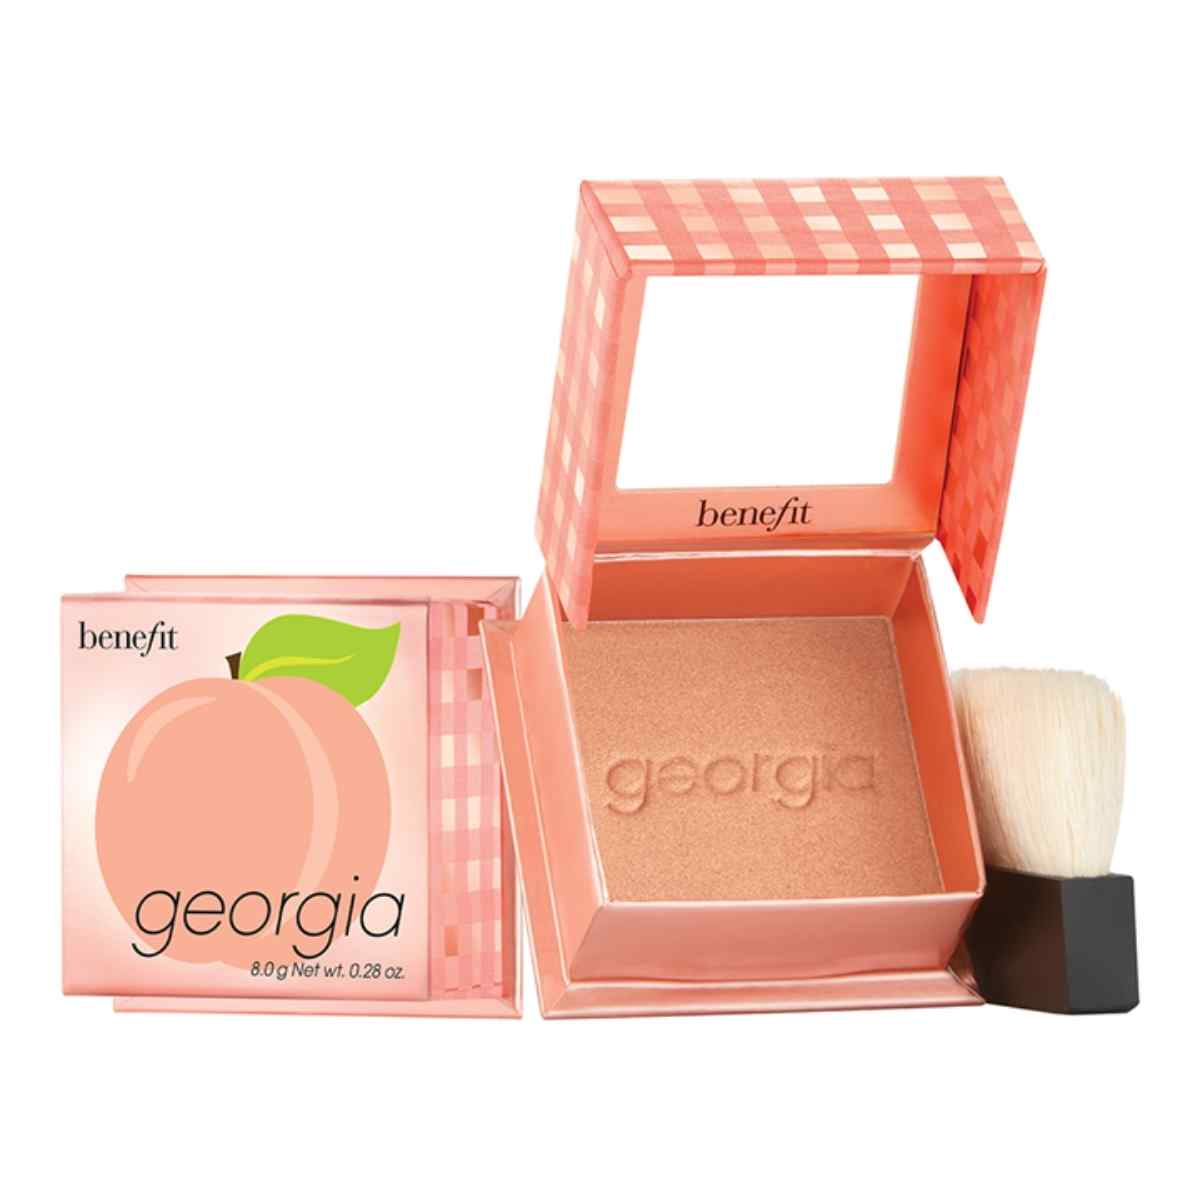 summer blush with glowing finish